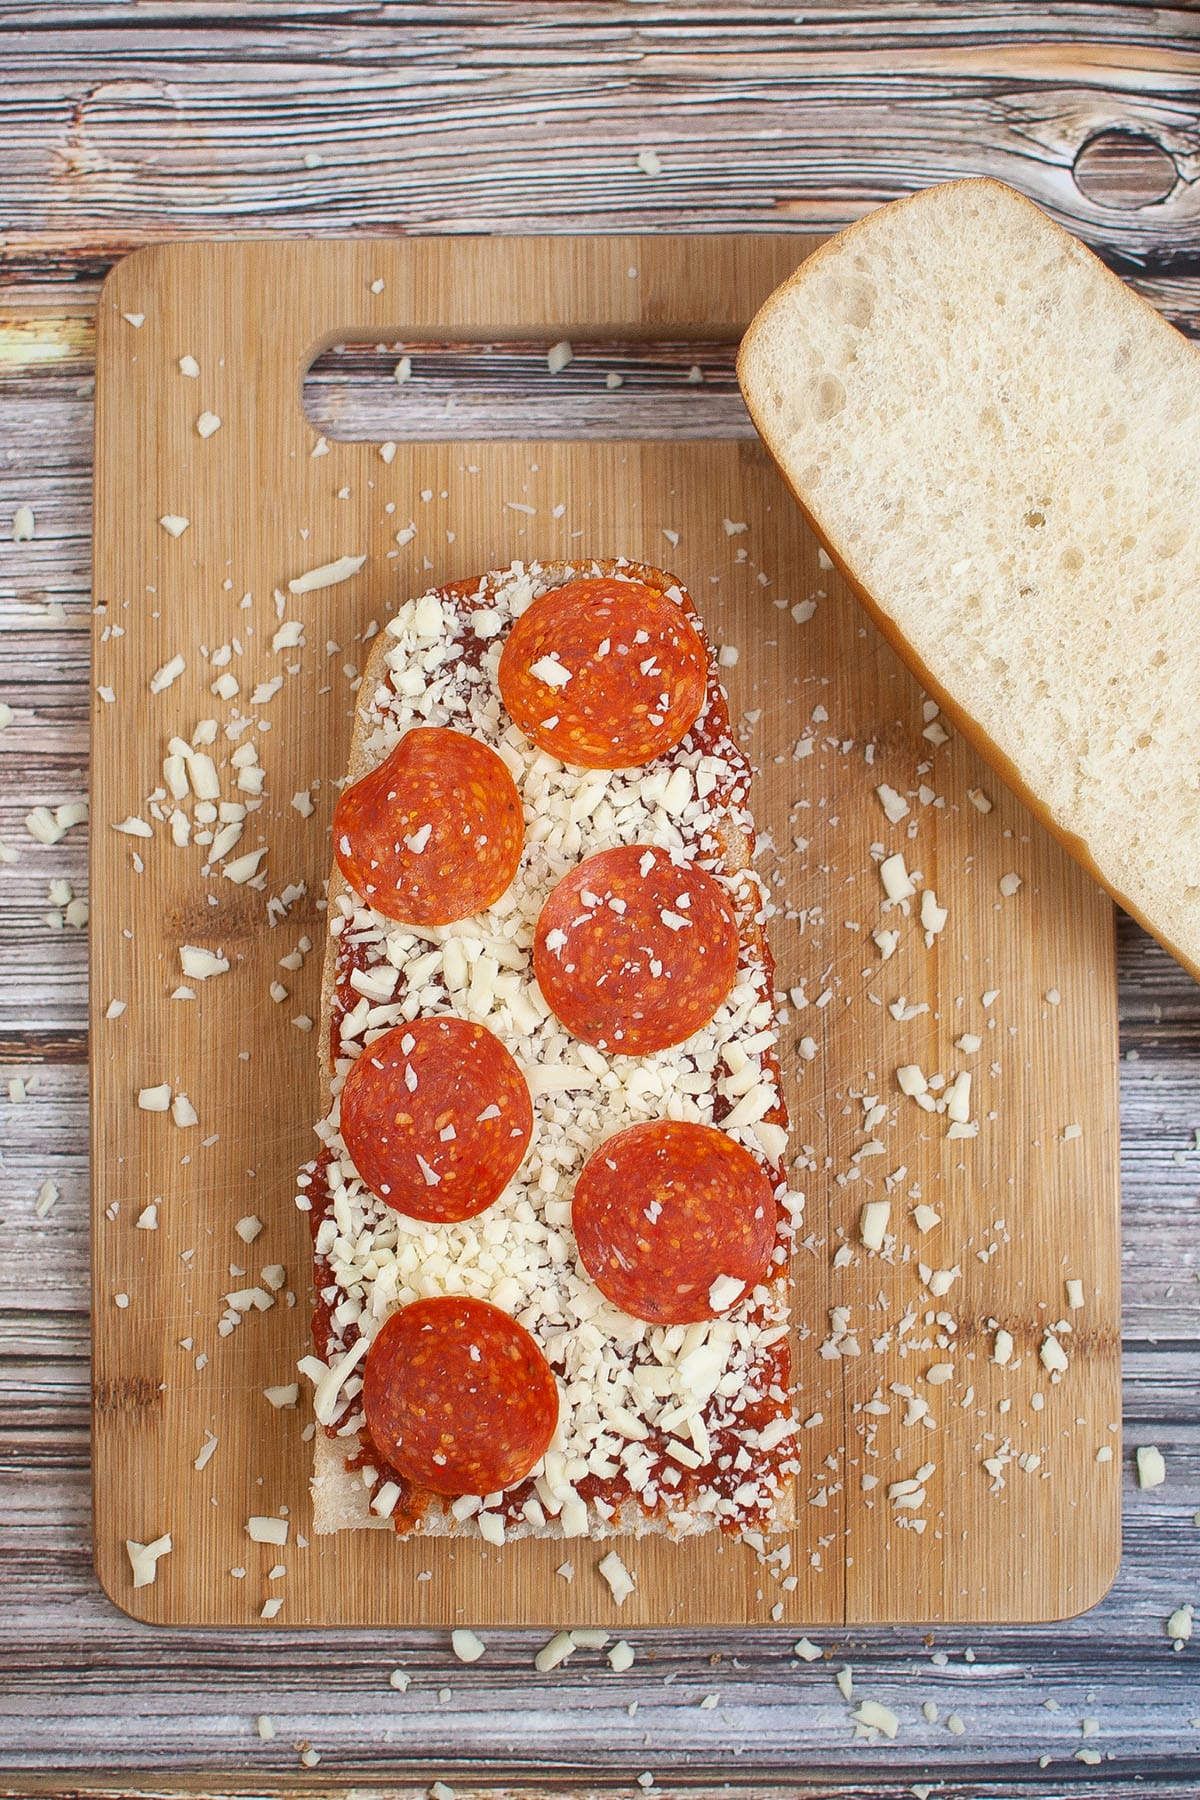 A slice bread with tomato sauce mixture topped with cheese and pepperoni in a wooden chopping board